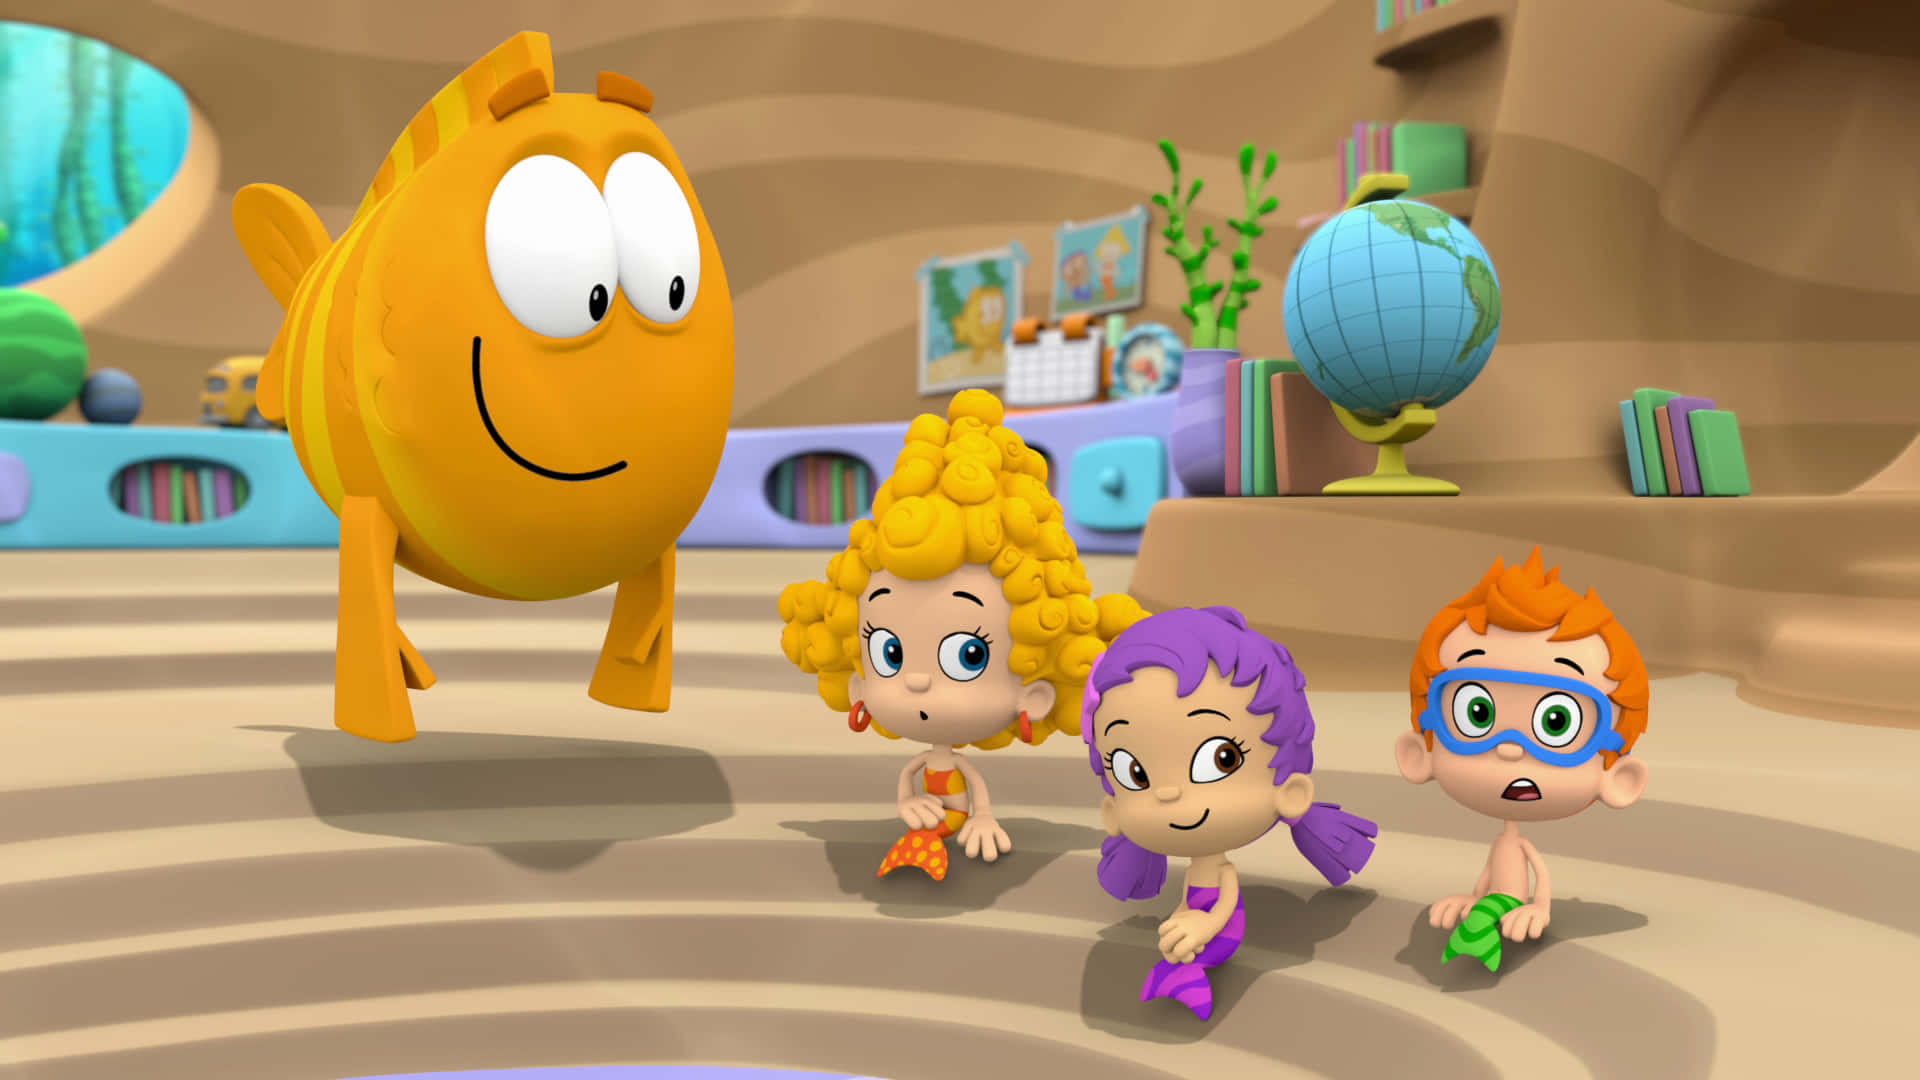 Dive into learning with the Bubble Guppies!